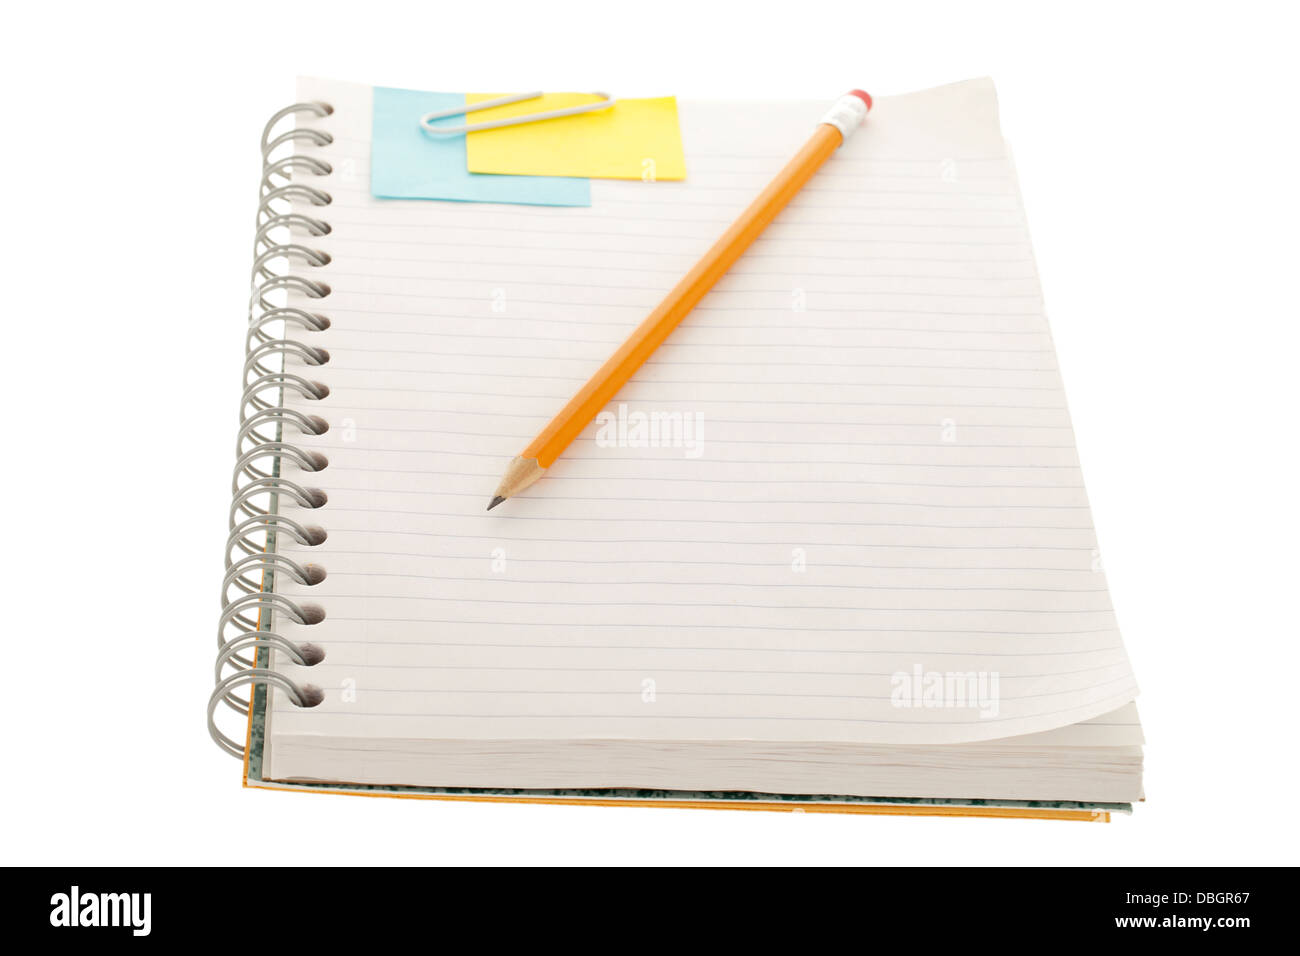 notebook with adhesive note paper clip and pencil Stock Photo